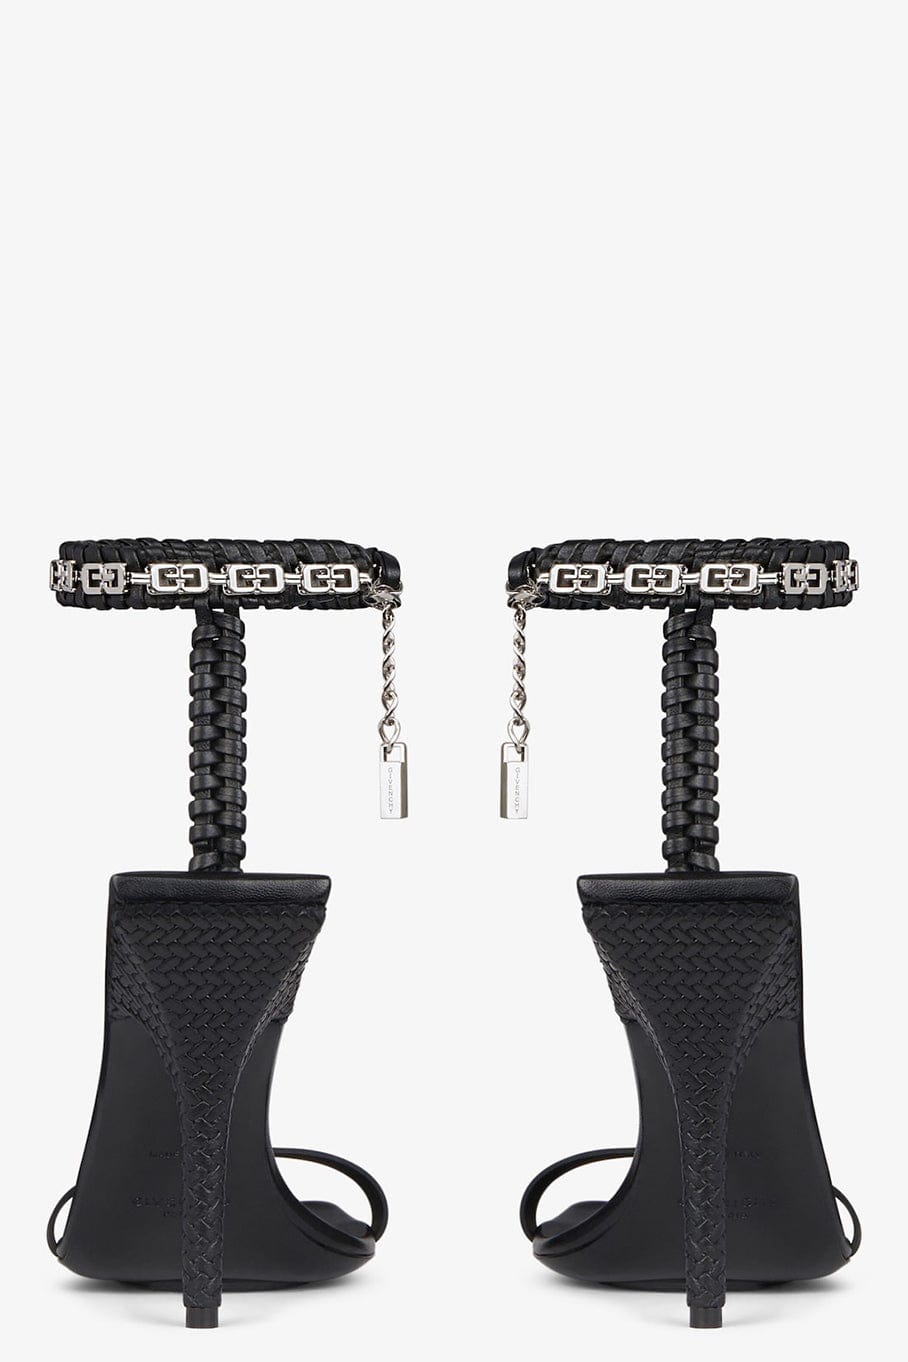 GIVENCHY-G Woven Ankle Strap Sandal-